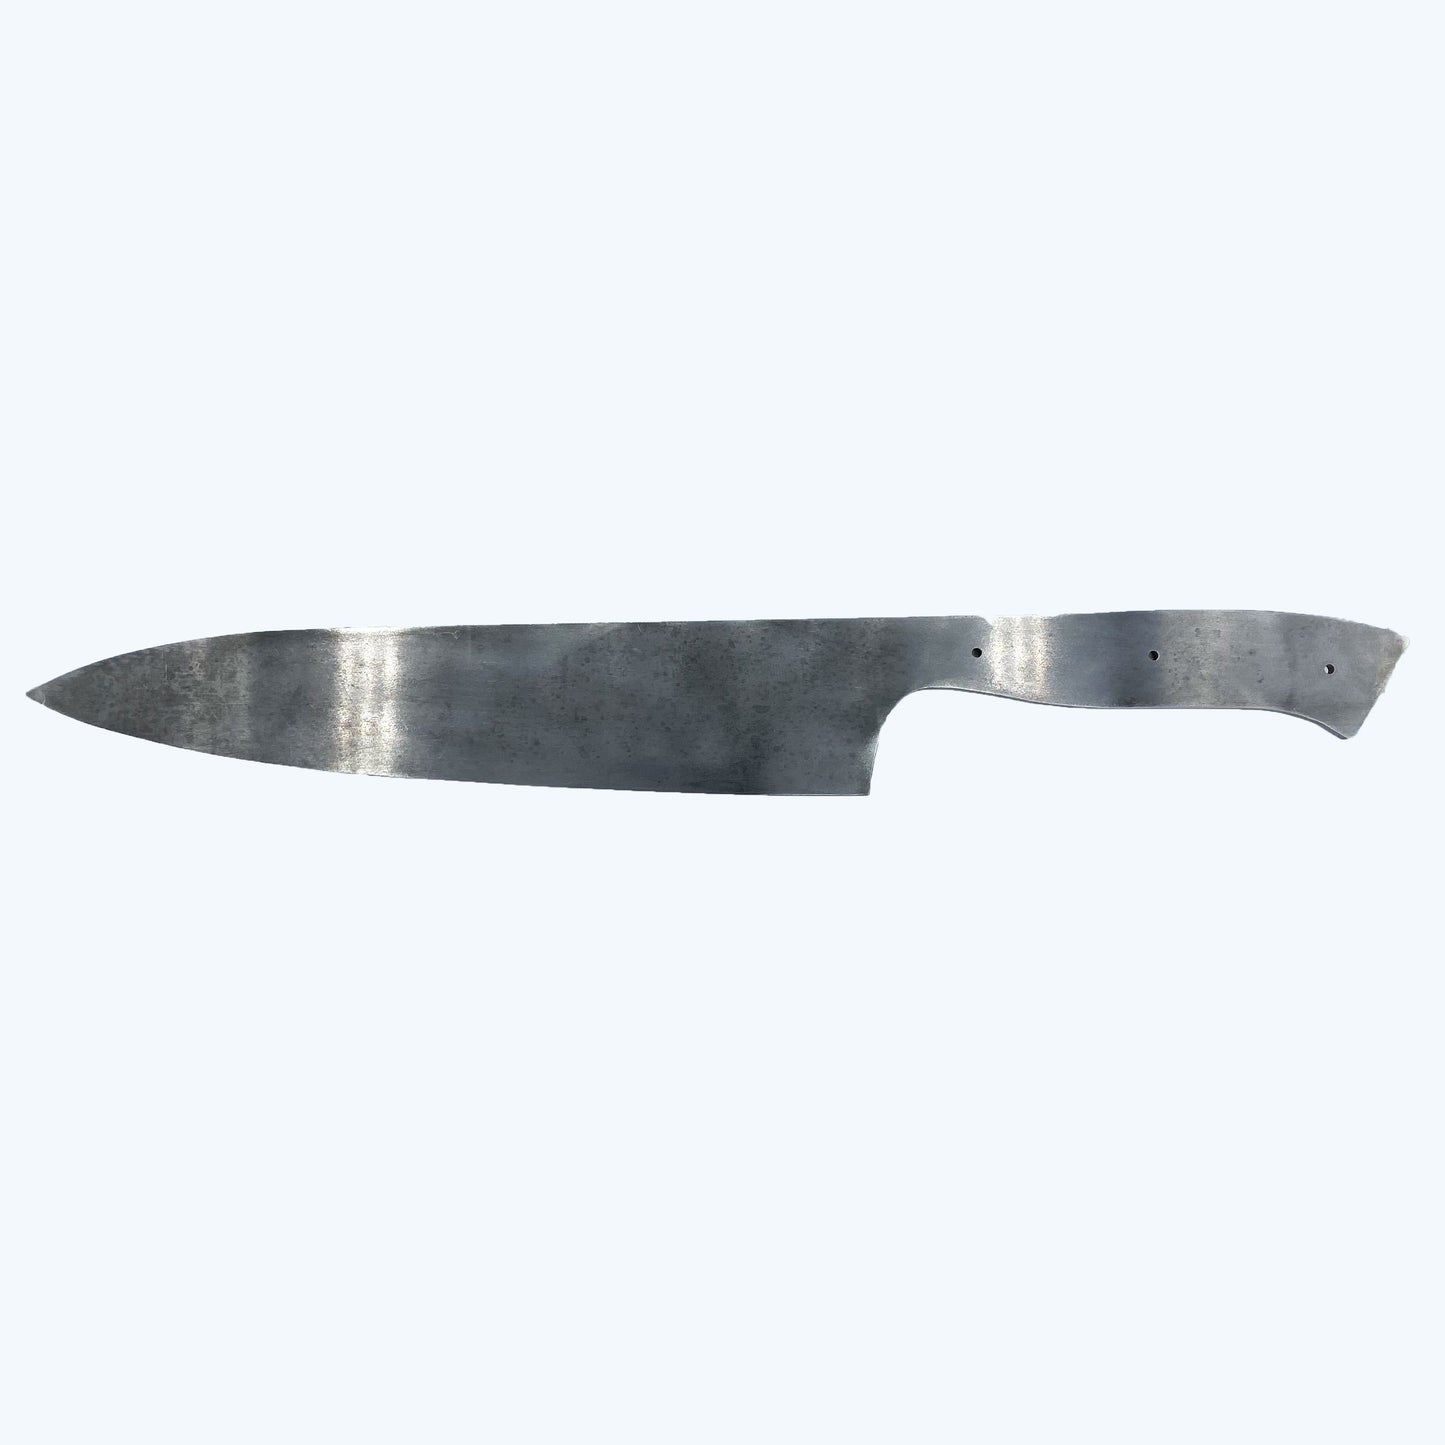 Chef Knife 8 inch - High Carbon Stainless Steel